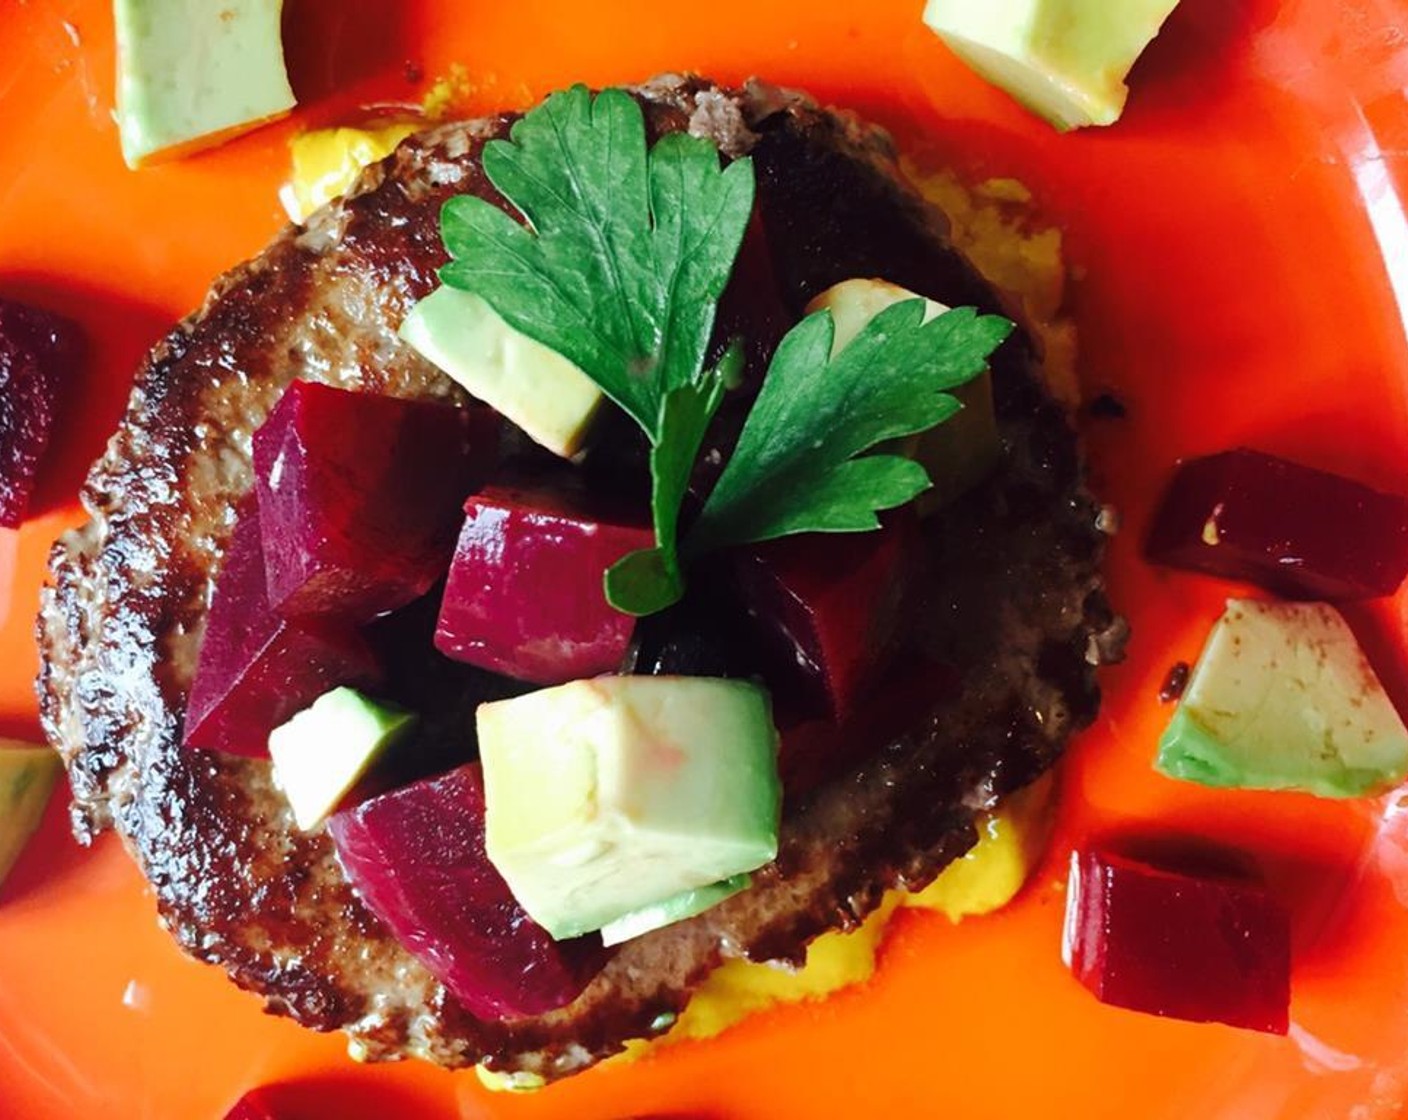 step 3 Spread the Yellow Mustard (2 Tbsp) on a plate. Lay the beef patty on top, and add the beet and avocado salad, garnish with Fresh Parsley (1 handful) and serve!